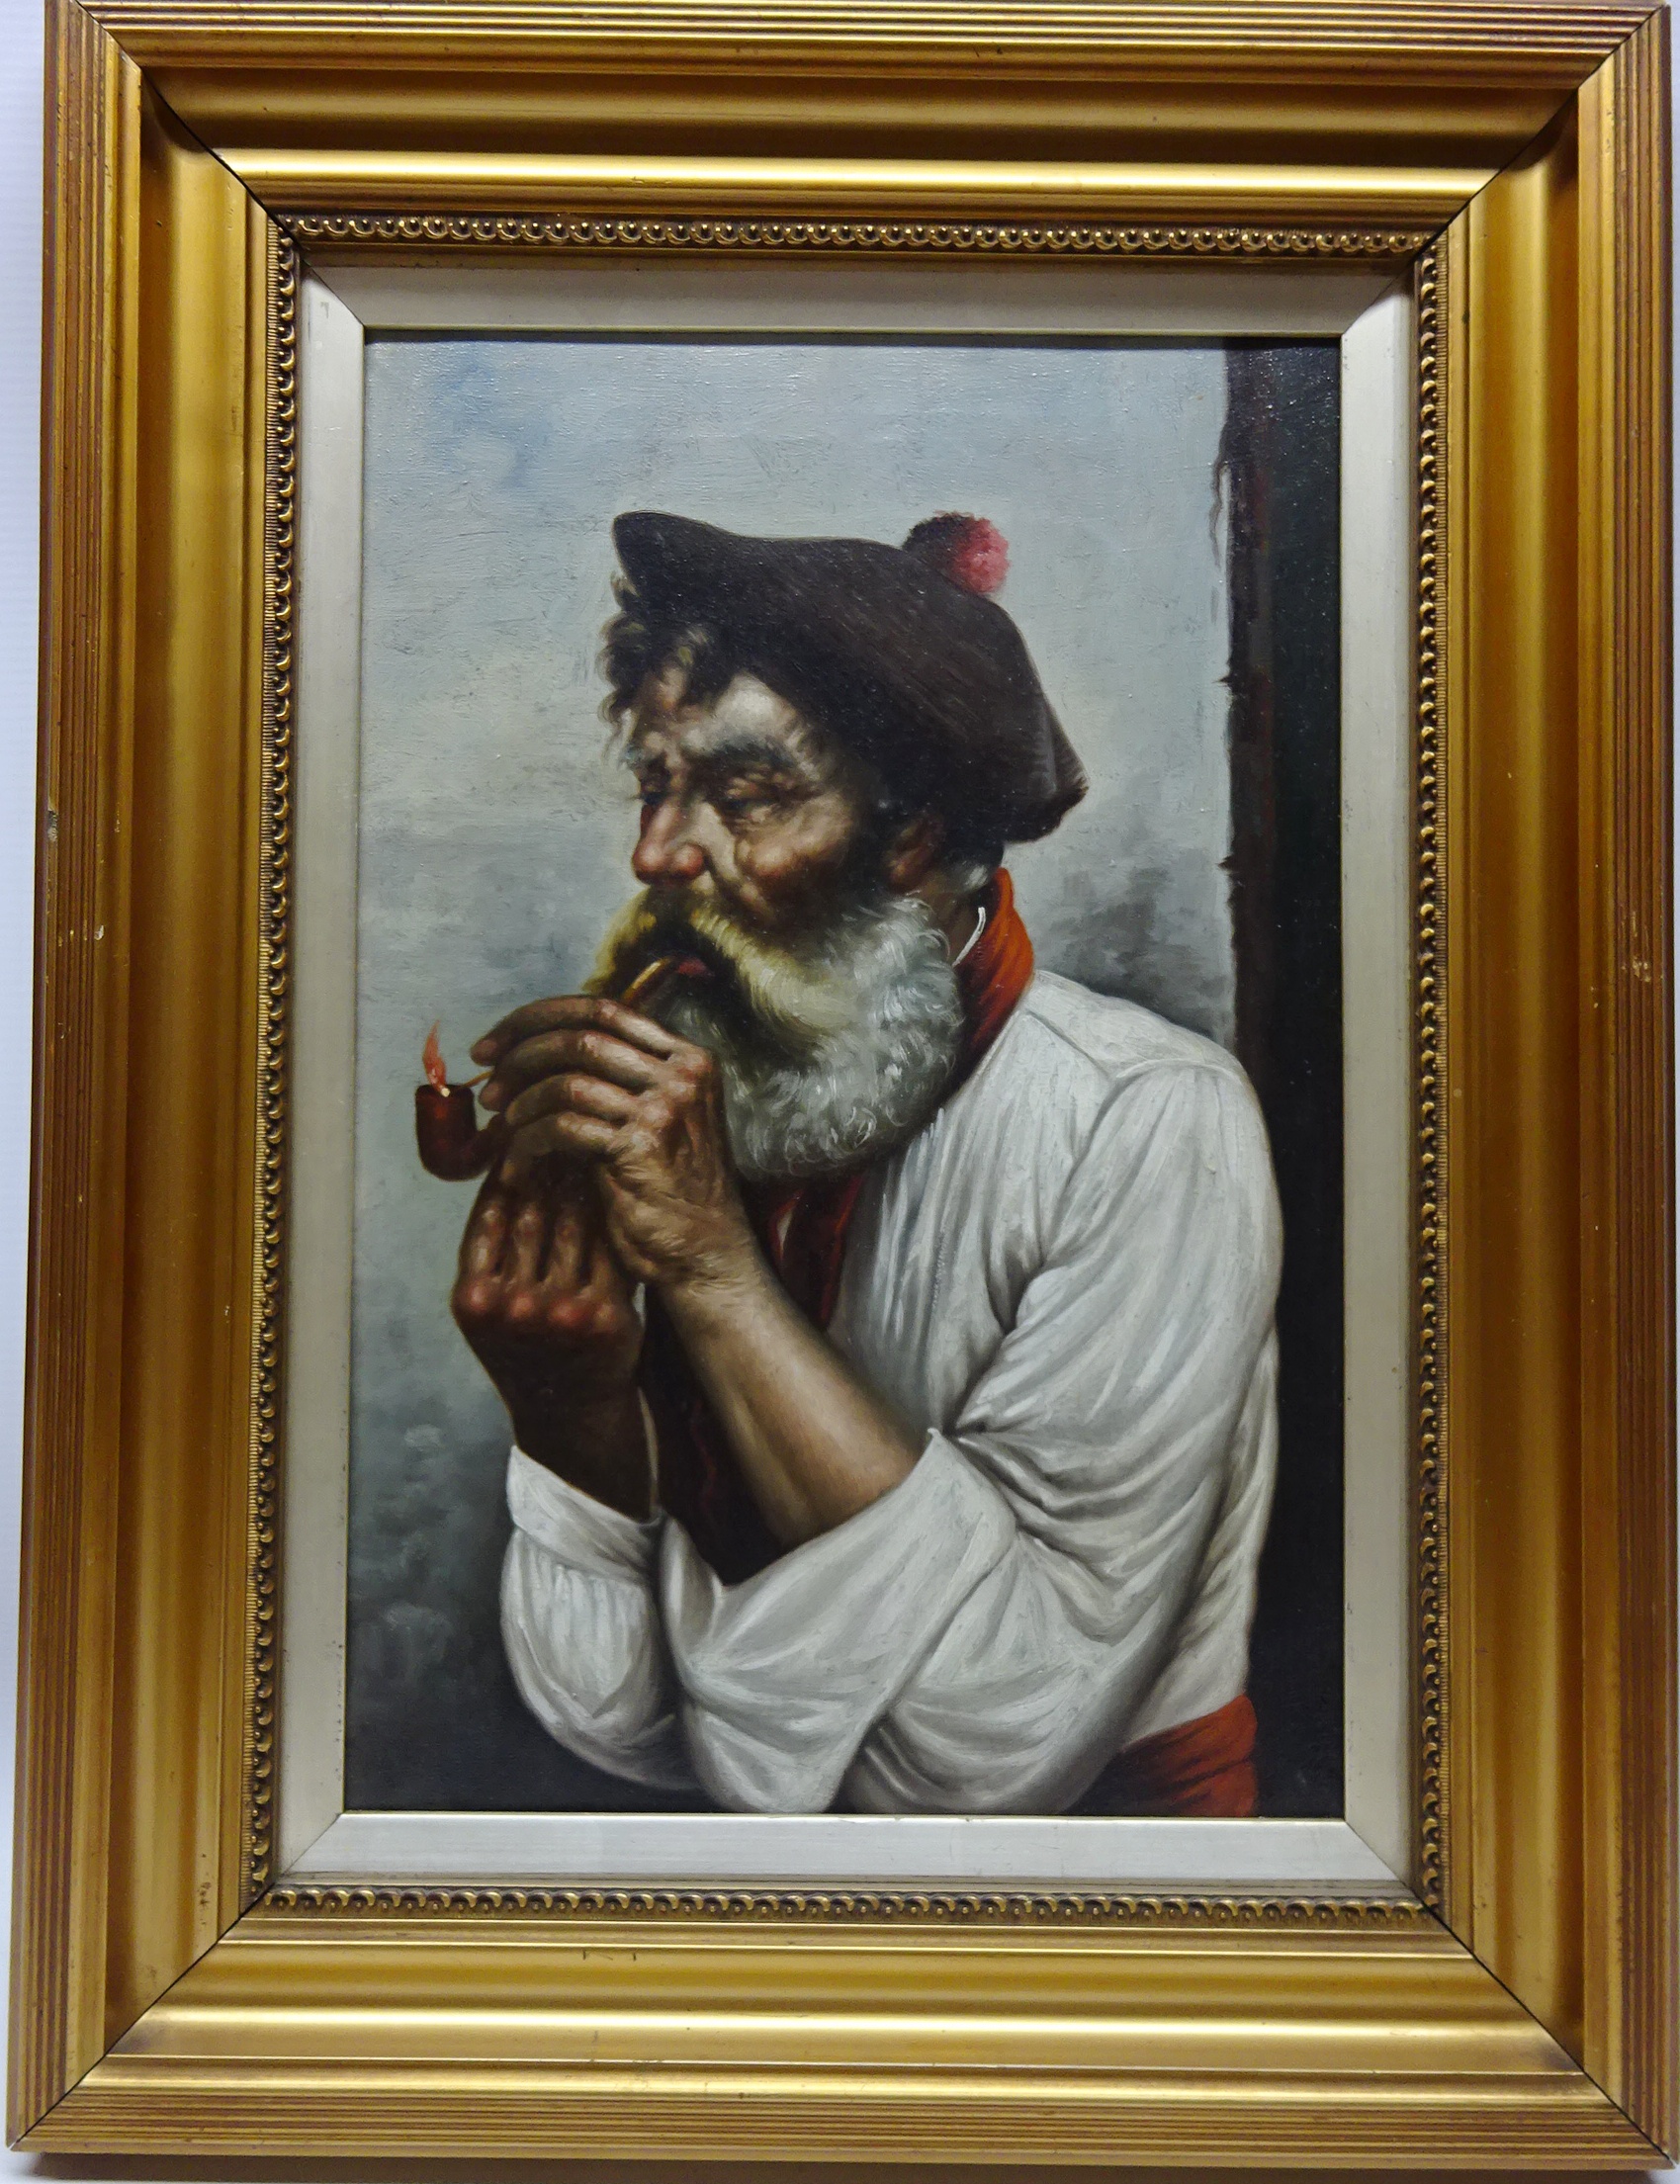 Portrait of a Bearded Italian Man Smoking a Pipe, - Image 2 of 2